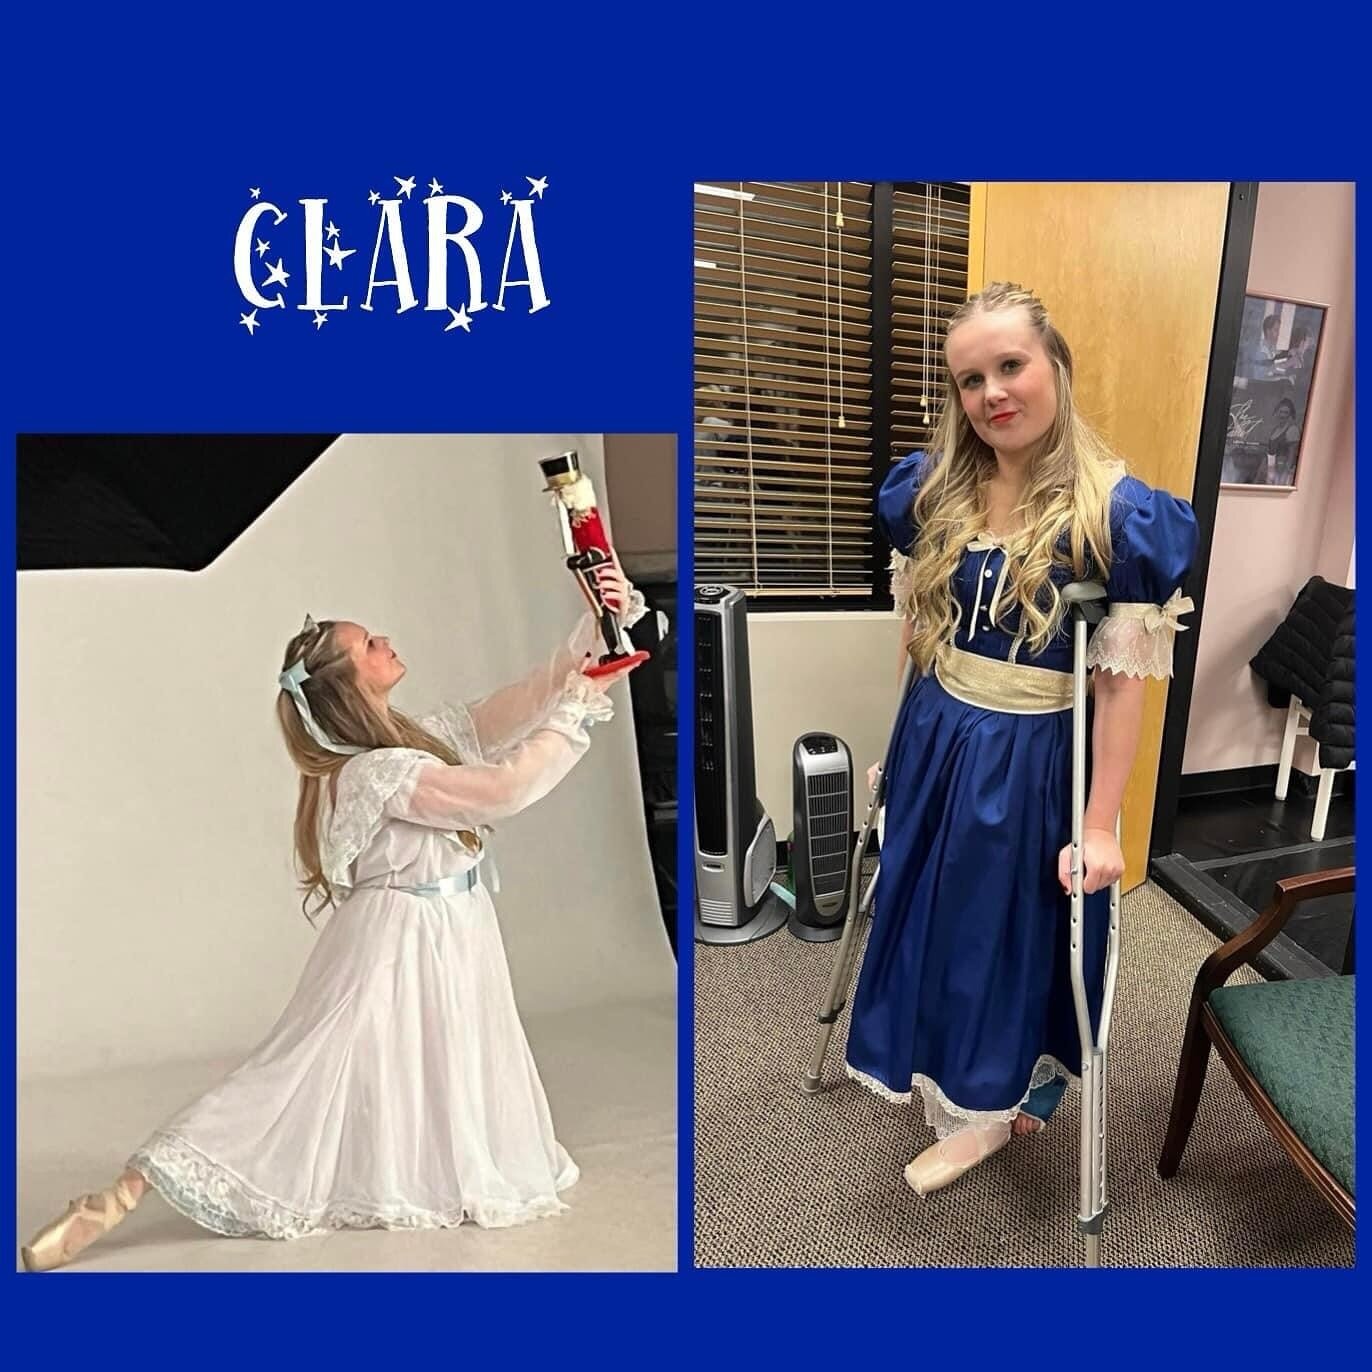 Two more shows today! Tickets are available at the door for 10:00 and the 2:00 show is now sold out. Today will be very special so we hope to see you there! Beautiful Leigha is a senior who has been with us since age 3. She is dancing as Clara today.